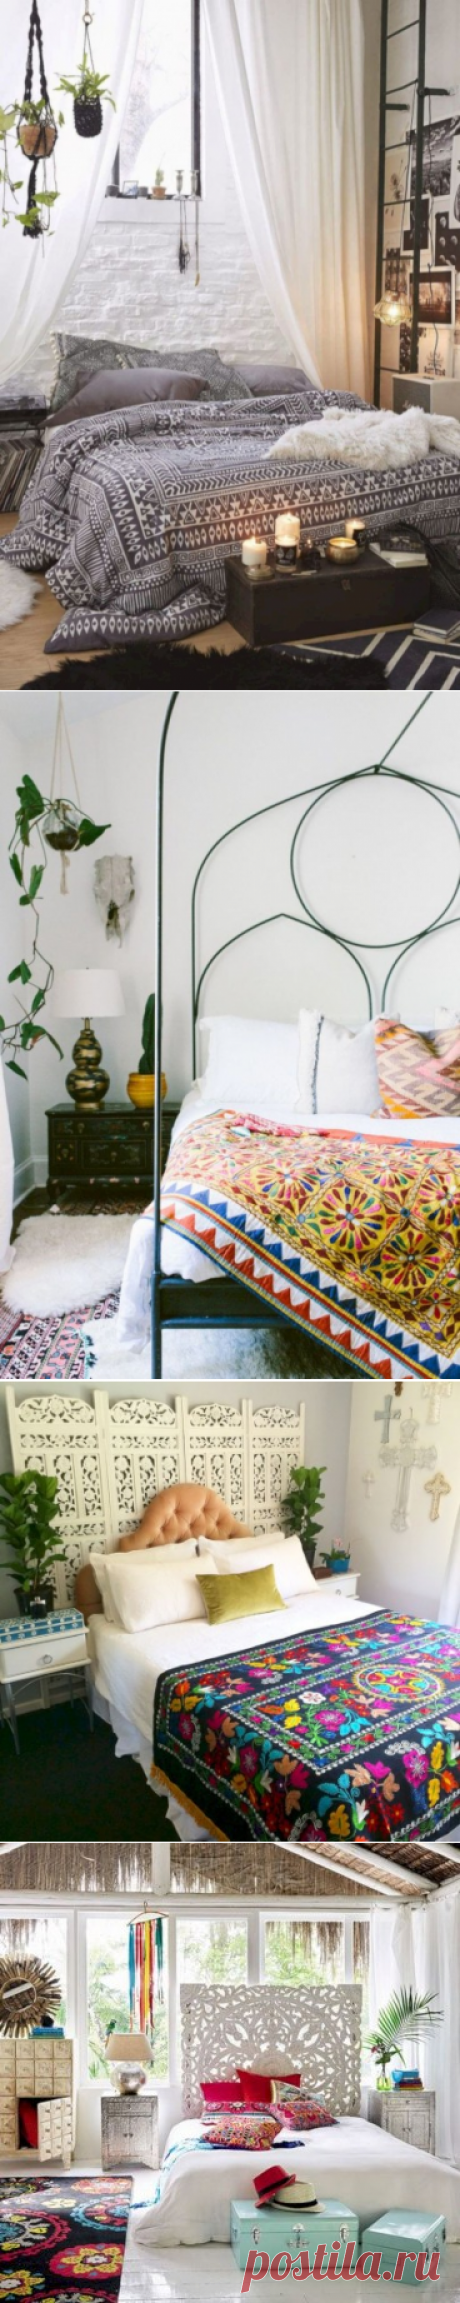 60 Fun Bohemian Style Bedroom Designs Ideas - About-Ruth